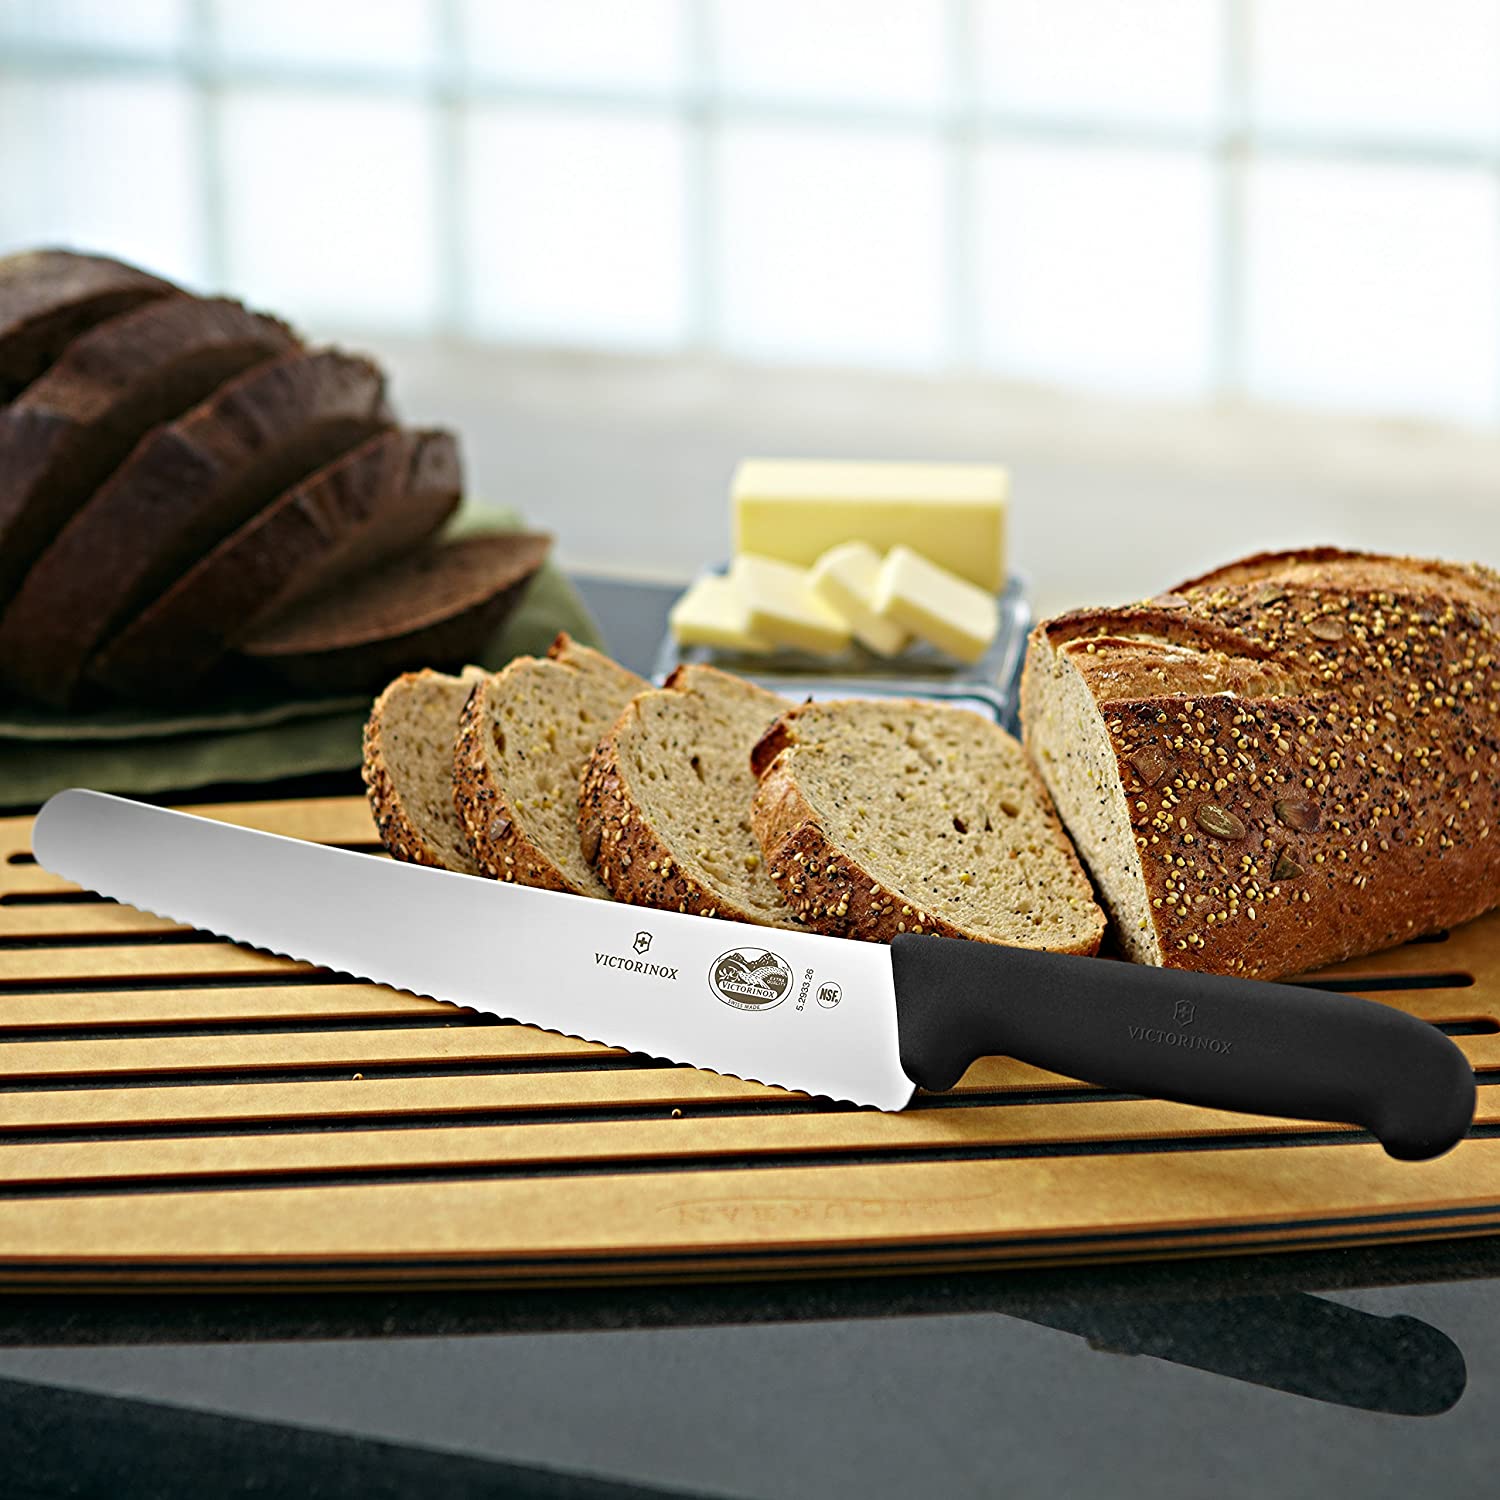 The 6 best kitchen knives we tested